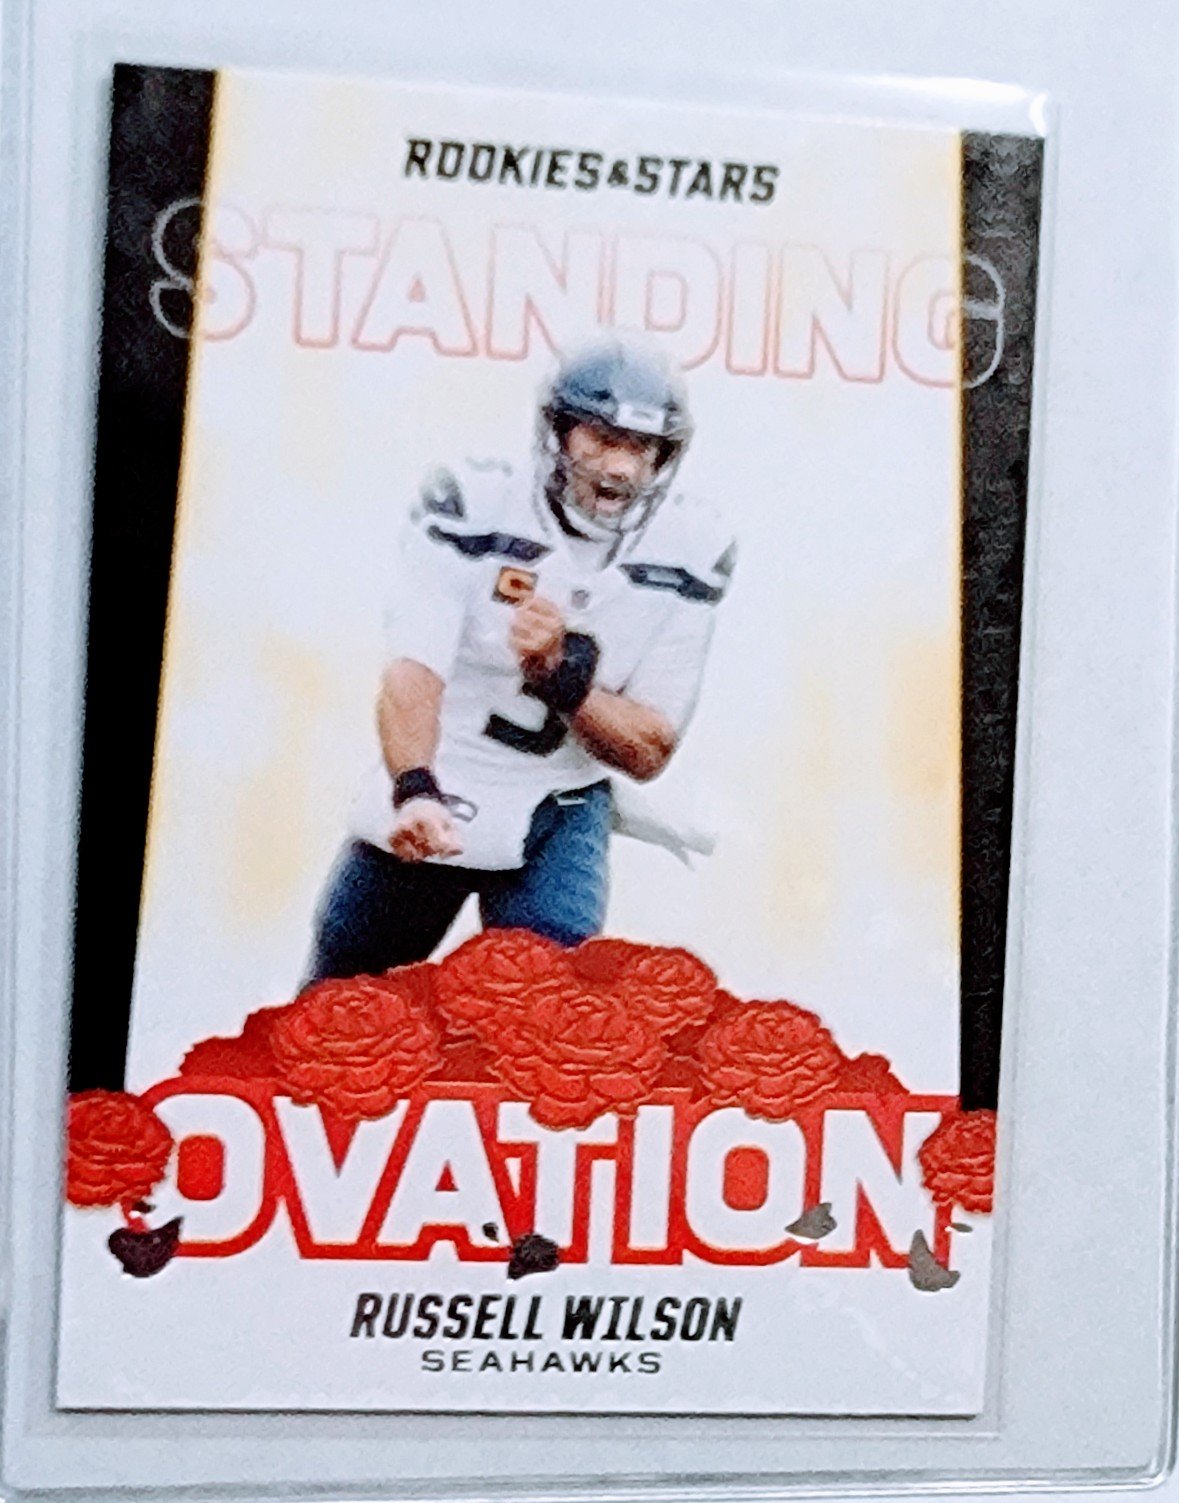 2021 Panini Rookies and Stars Russell Wilson Standing Ovation Football Card AVM1 simple Xclusive Collectibles   